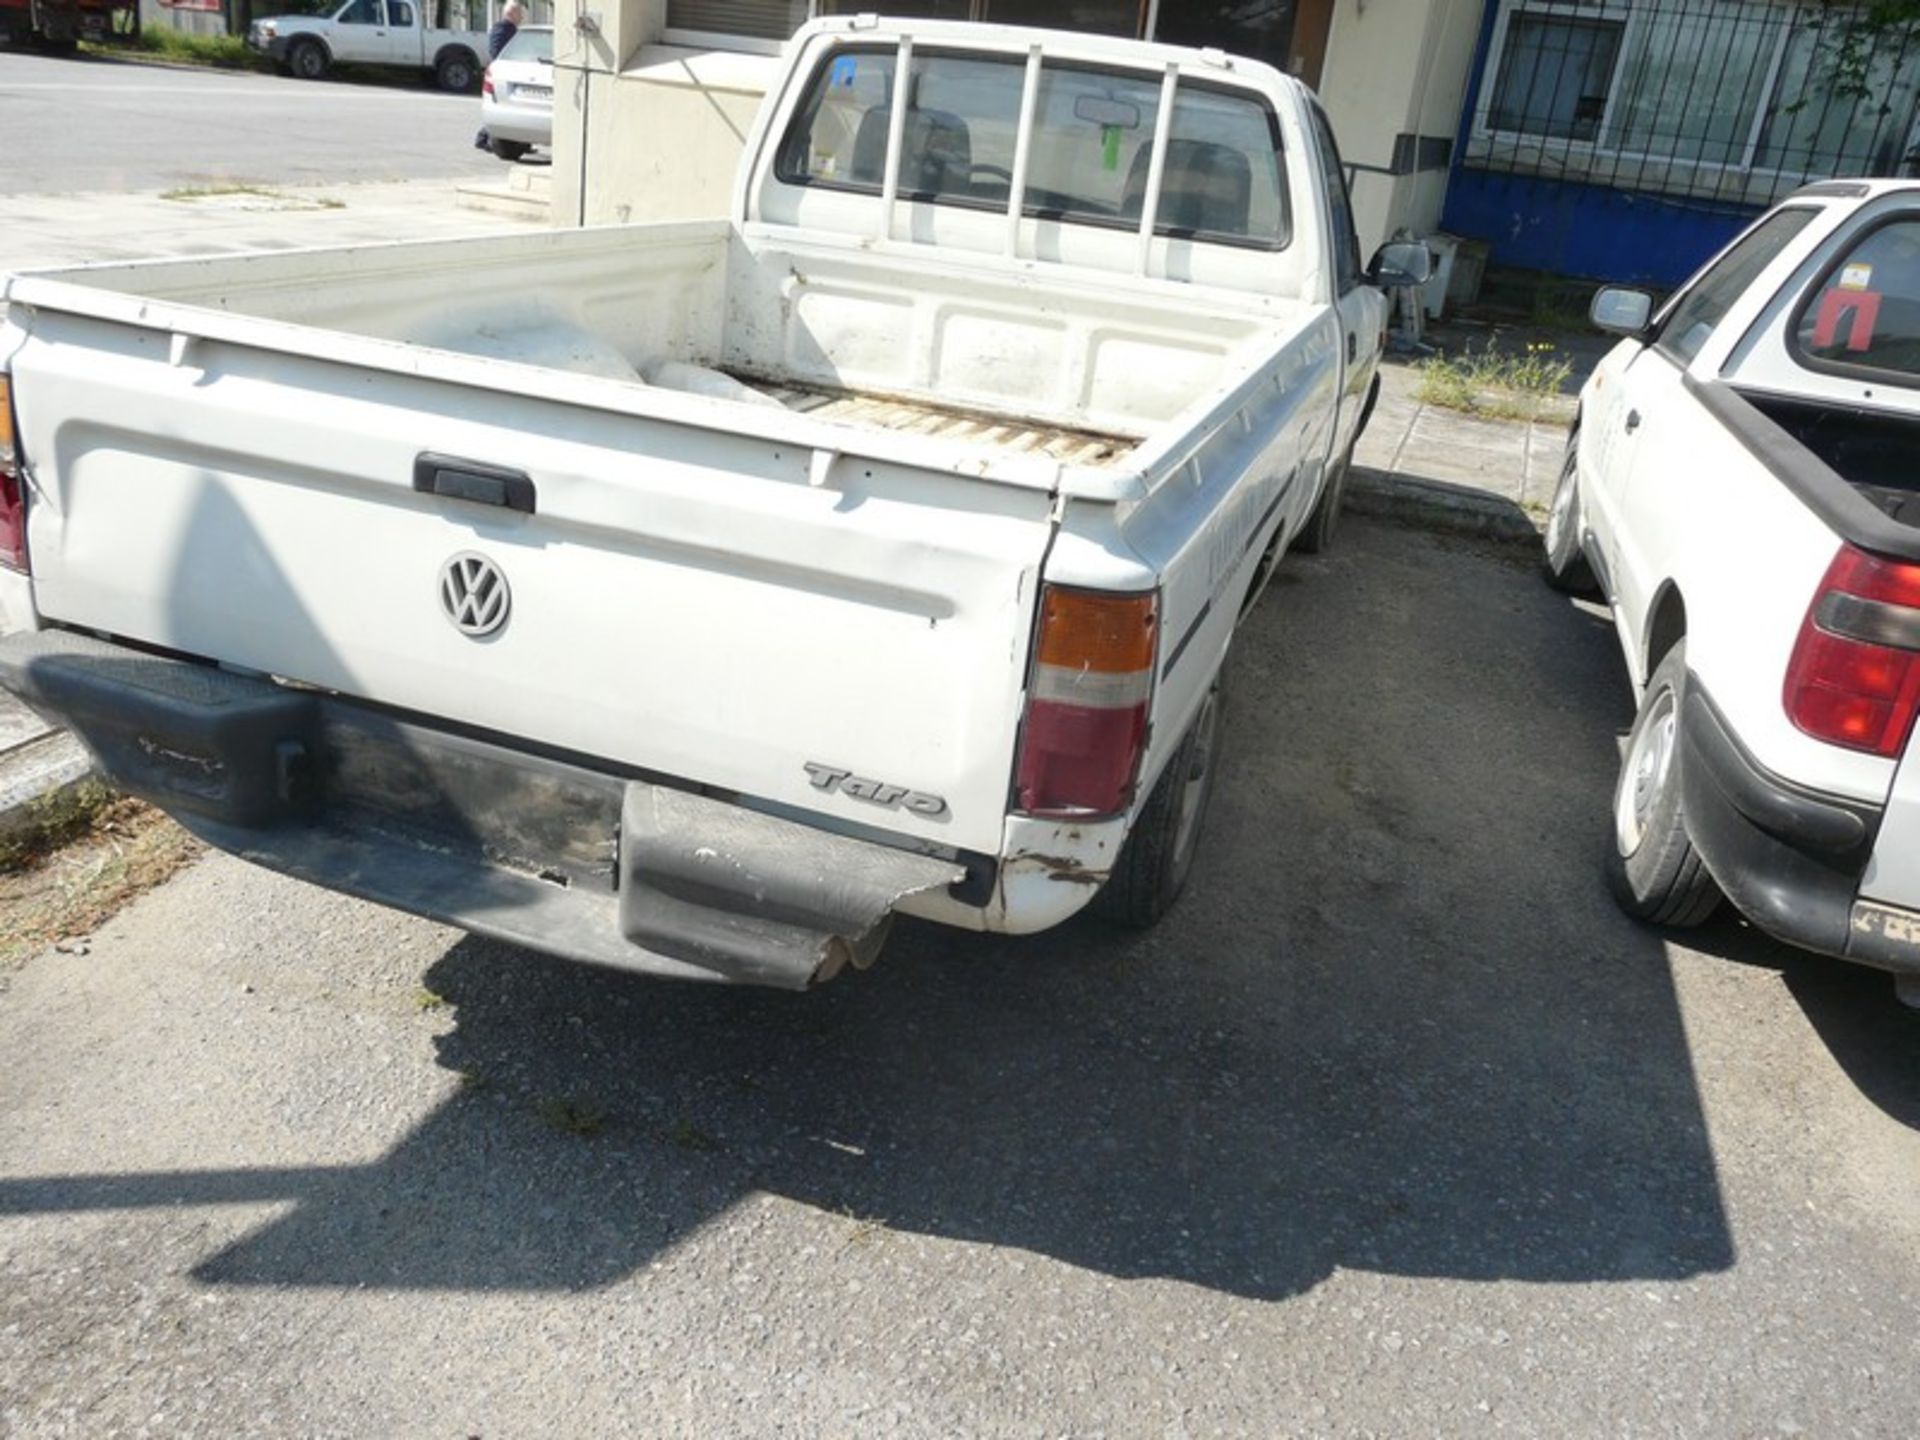 WV TARO REG NBY 4244 ,2.4 DIESEL ,KM 188583,Pick Up Truck ,2 Doors, Service Book Available , Year: - Image 6 of 15